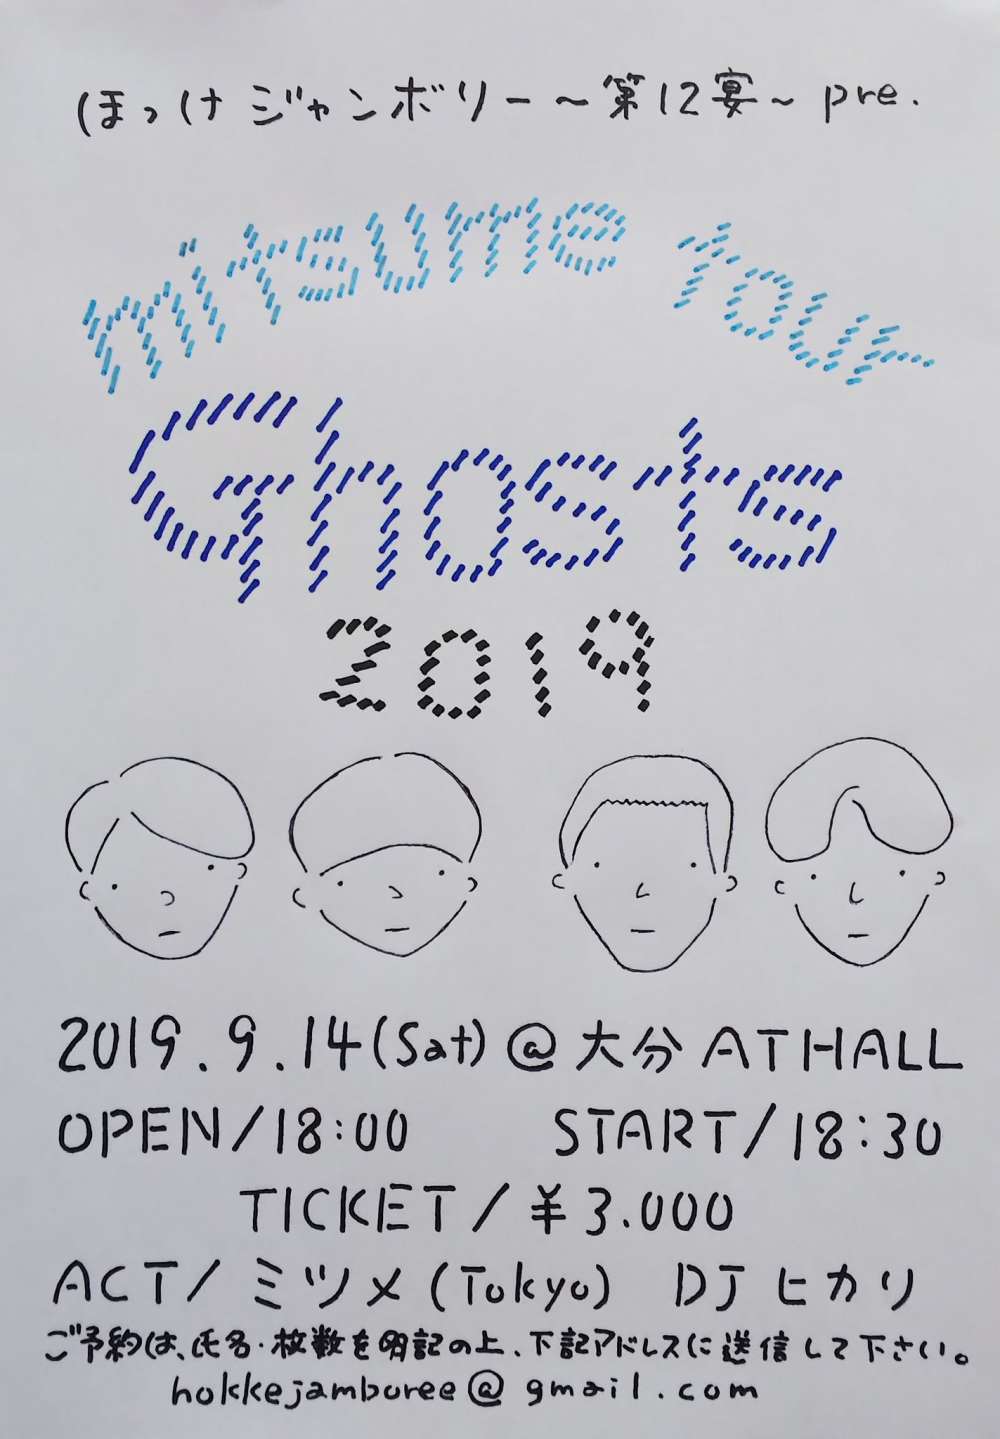 ｢mitsume tour Ghosts 2019｣追加公演が大分にて開催されます。